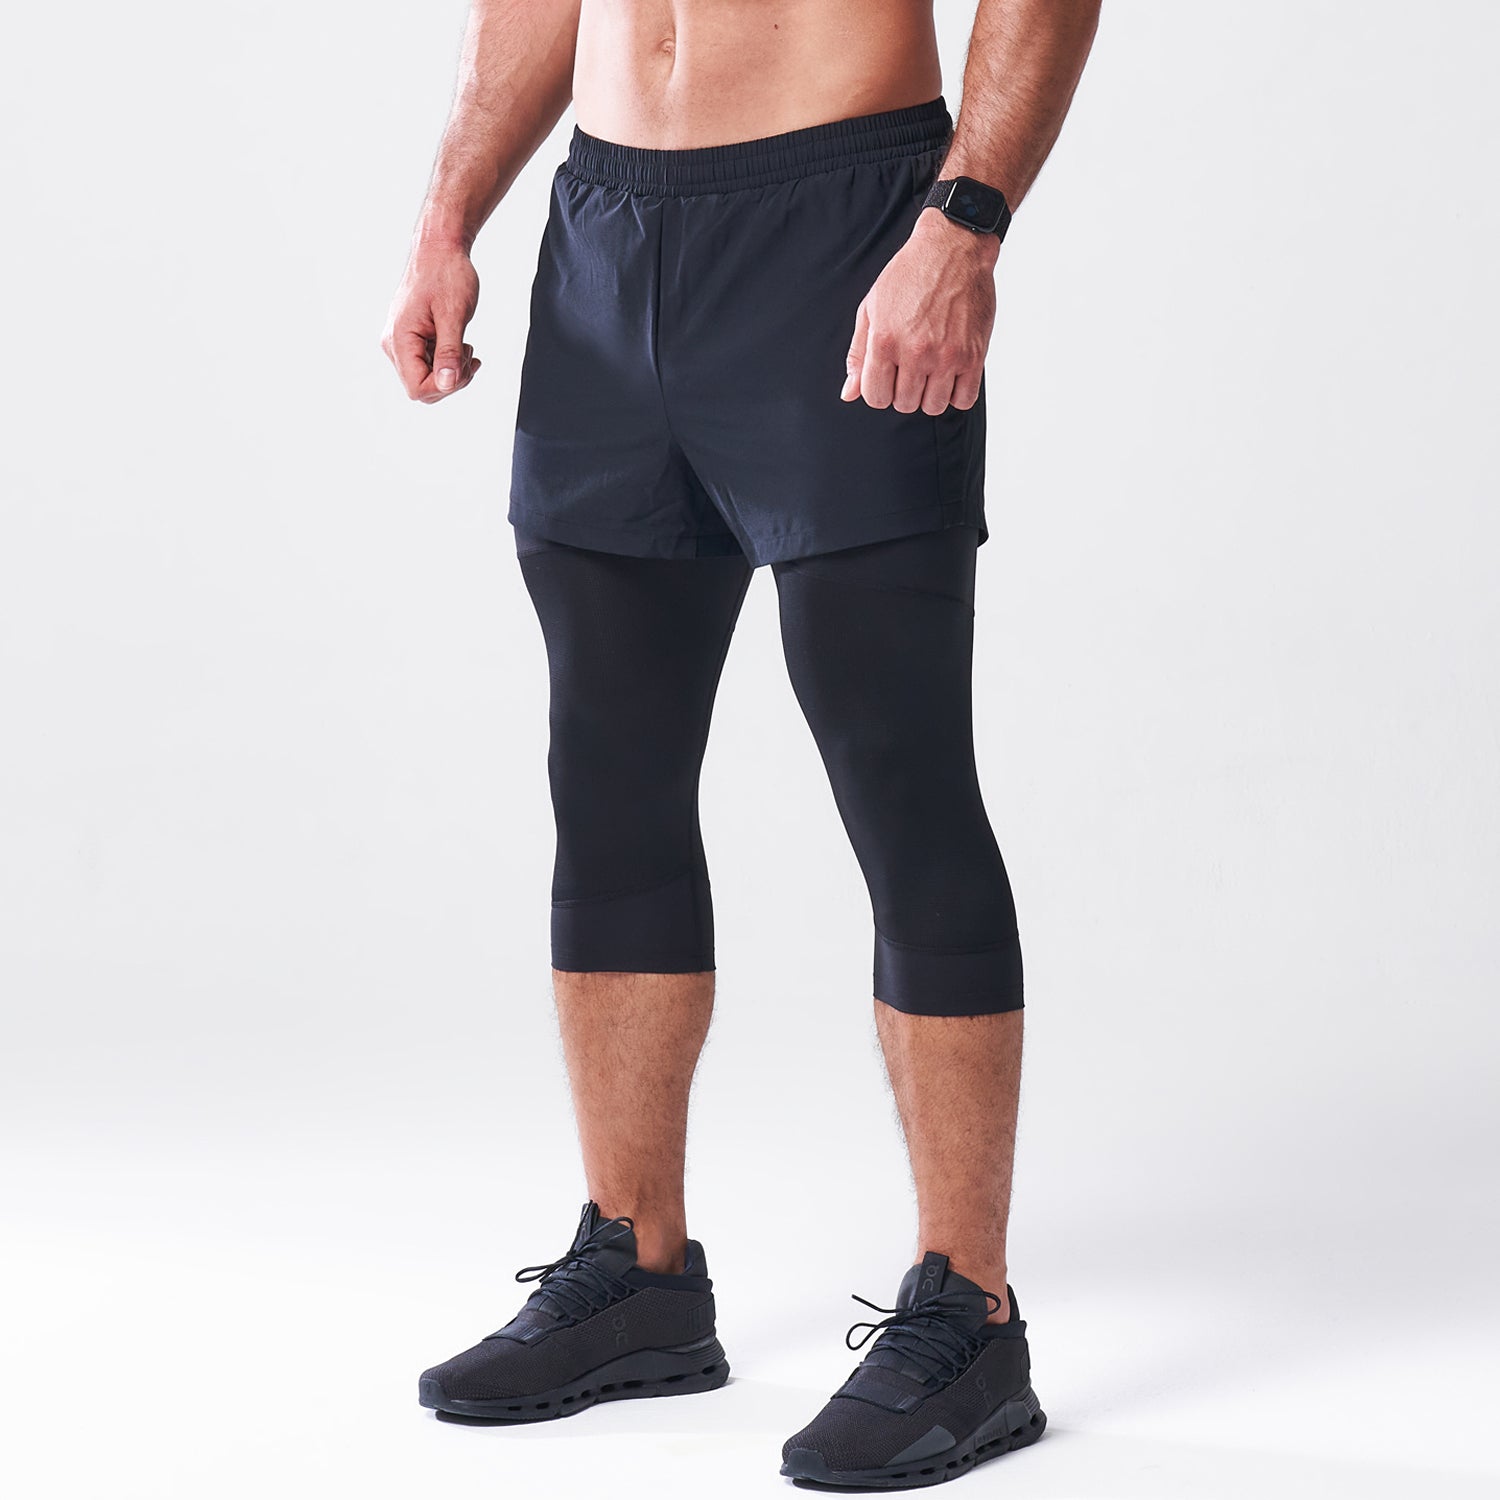 Buy NEVER QUIT Double Layer 2 in 1 Sports Shorts with Inner Tights for Men  Gym Tight Short with Pocket (S) Black at